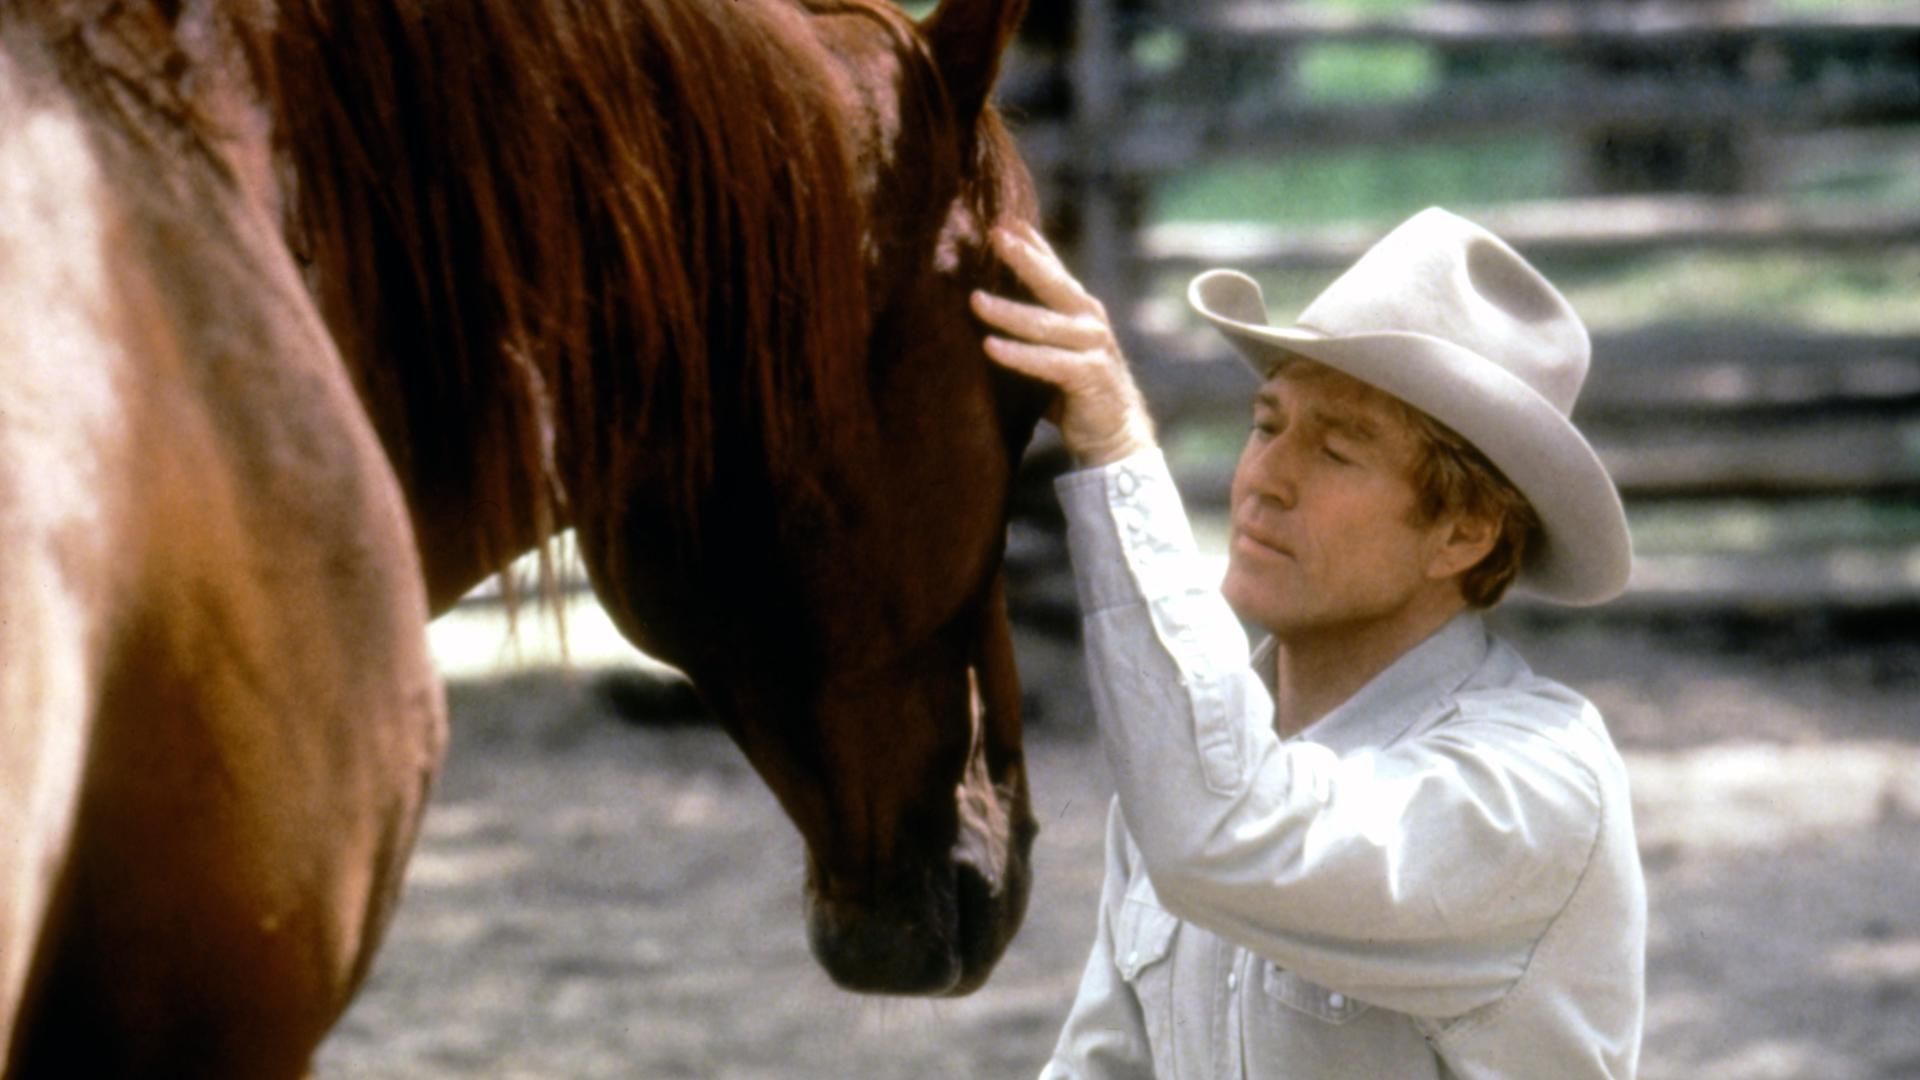 <p>                     Fans of Robert Redford – and horses – will love this adventure/romance that deals with the themes of trauma and love in an exciting equestrian drama.                   </p>                                      <p>                     Teenager Grace MacLean (Scarlett Johansson) is hit by a truck while out horse-riding. To help heal her troubled and injured daughter and horse, the mother, Annie MacLean (Dame Kristin Scott Thomas), takes them to Montana to recuperate at the ranch of  “horse whisperer” Tom Booker (Robert Redford).                   </p>